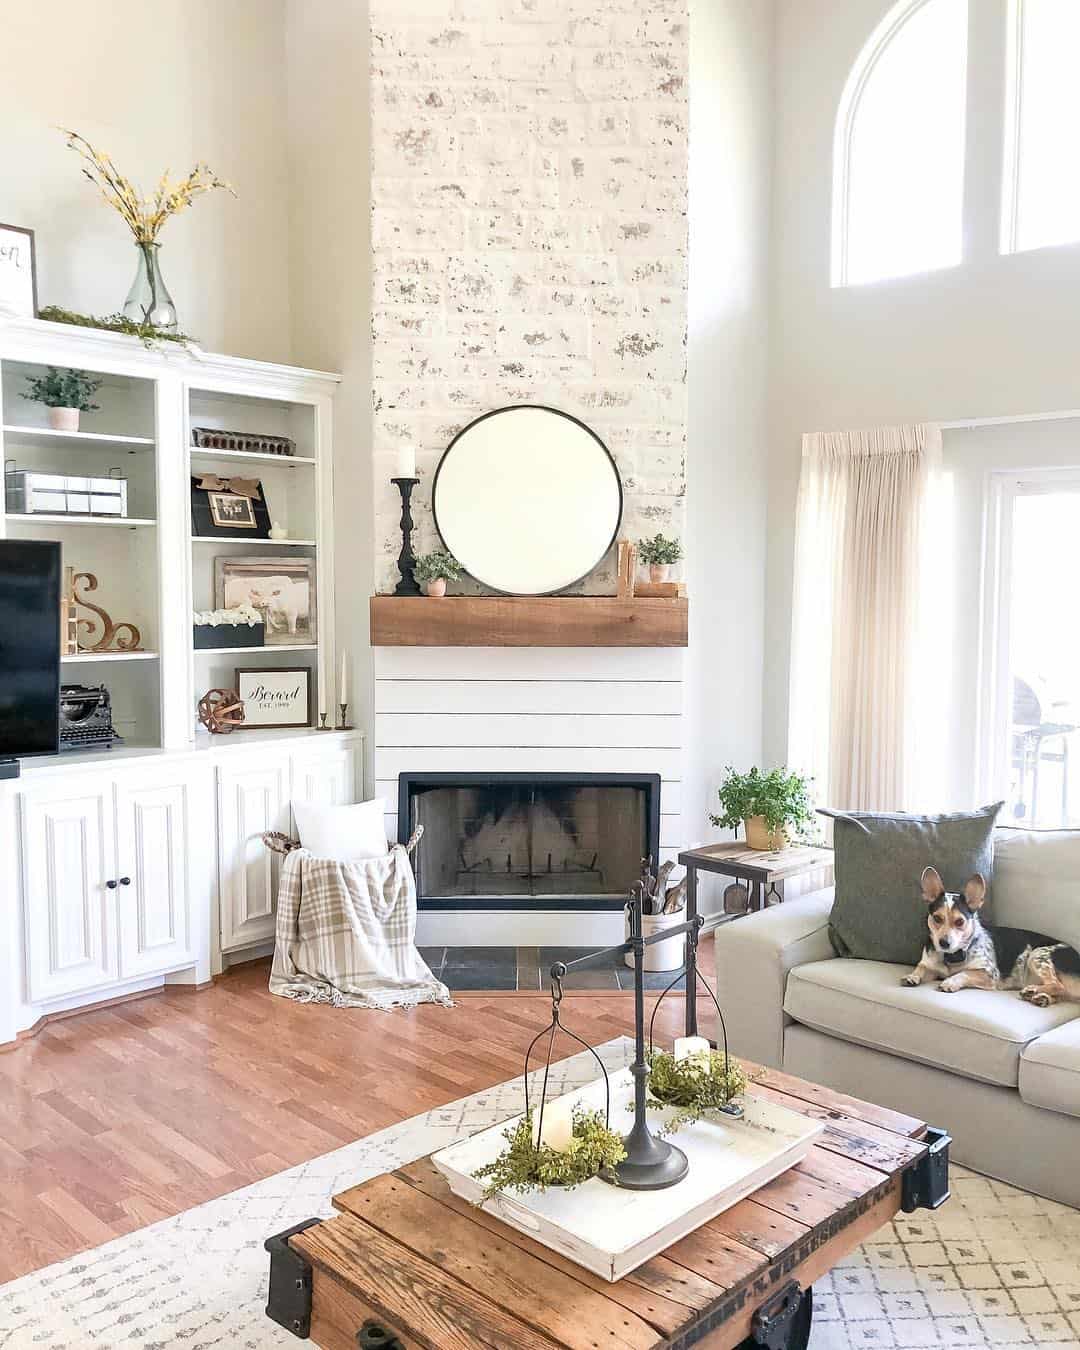 Tall Whitewashed Fireplace with Rustic Coffee Table - Soul & Lane